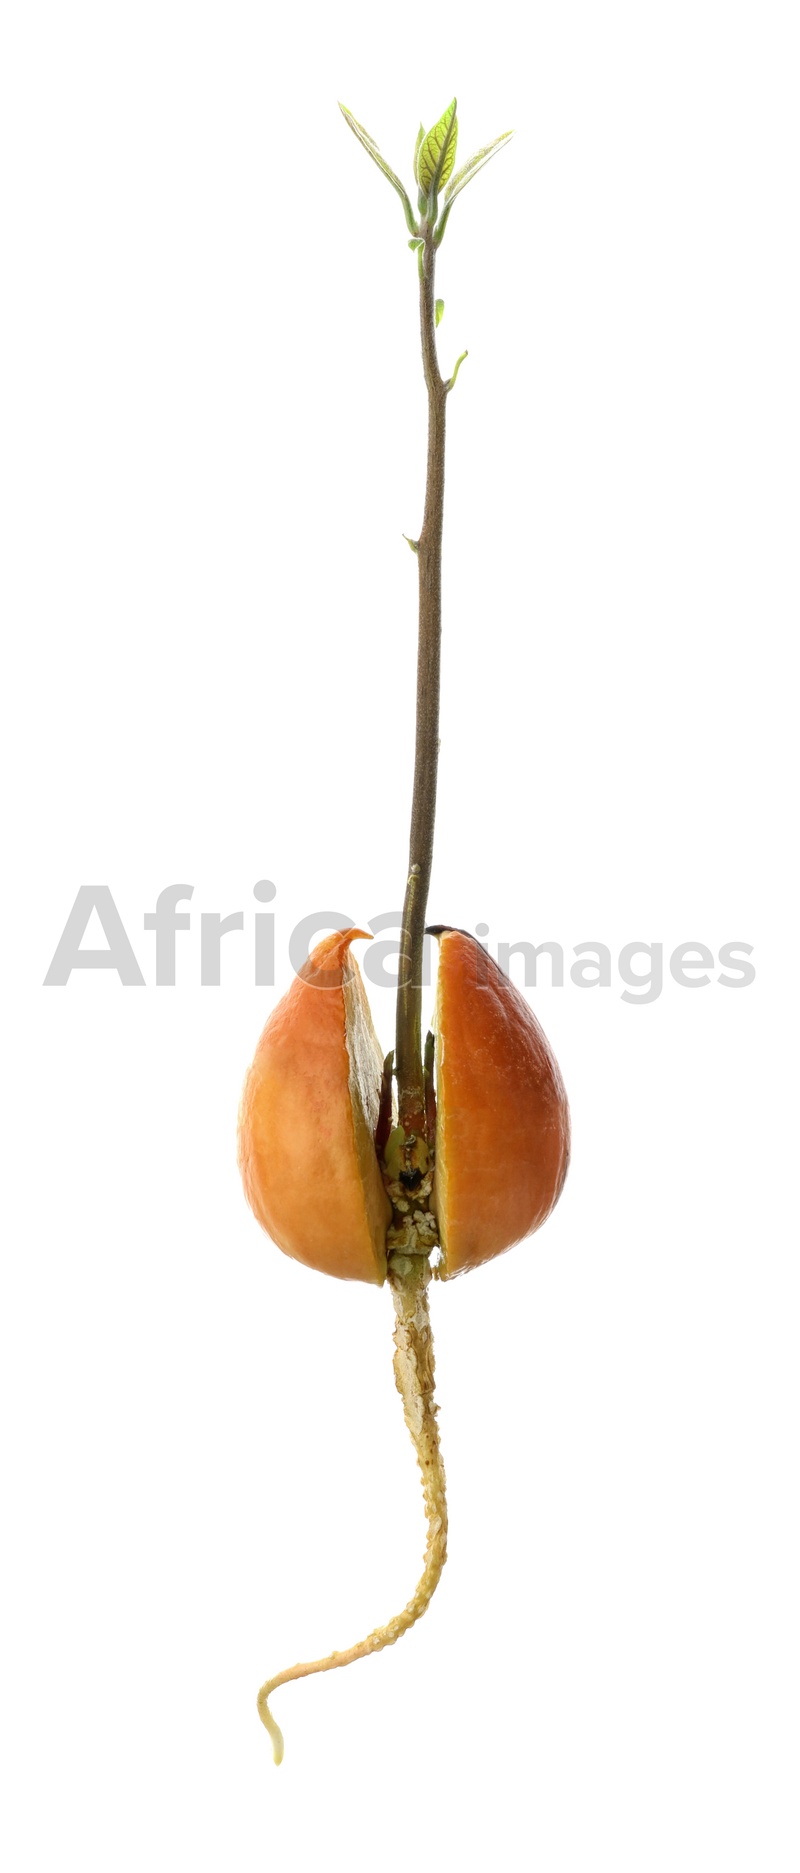 Avocado seed with sprout and root on white background